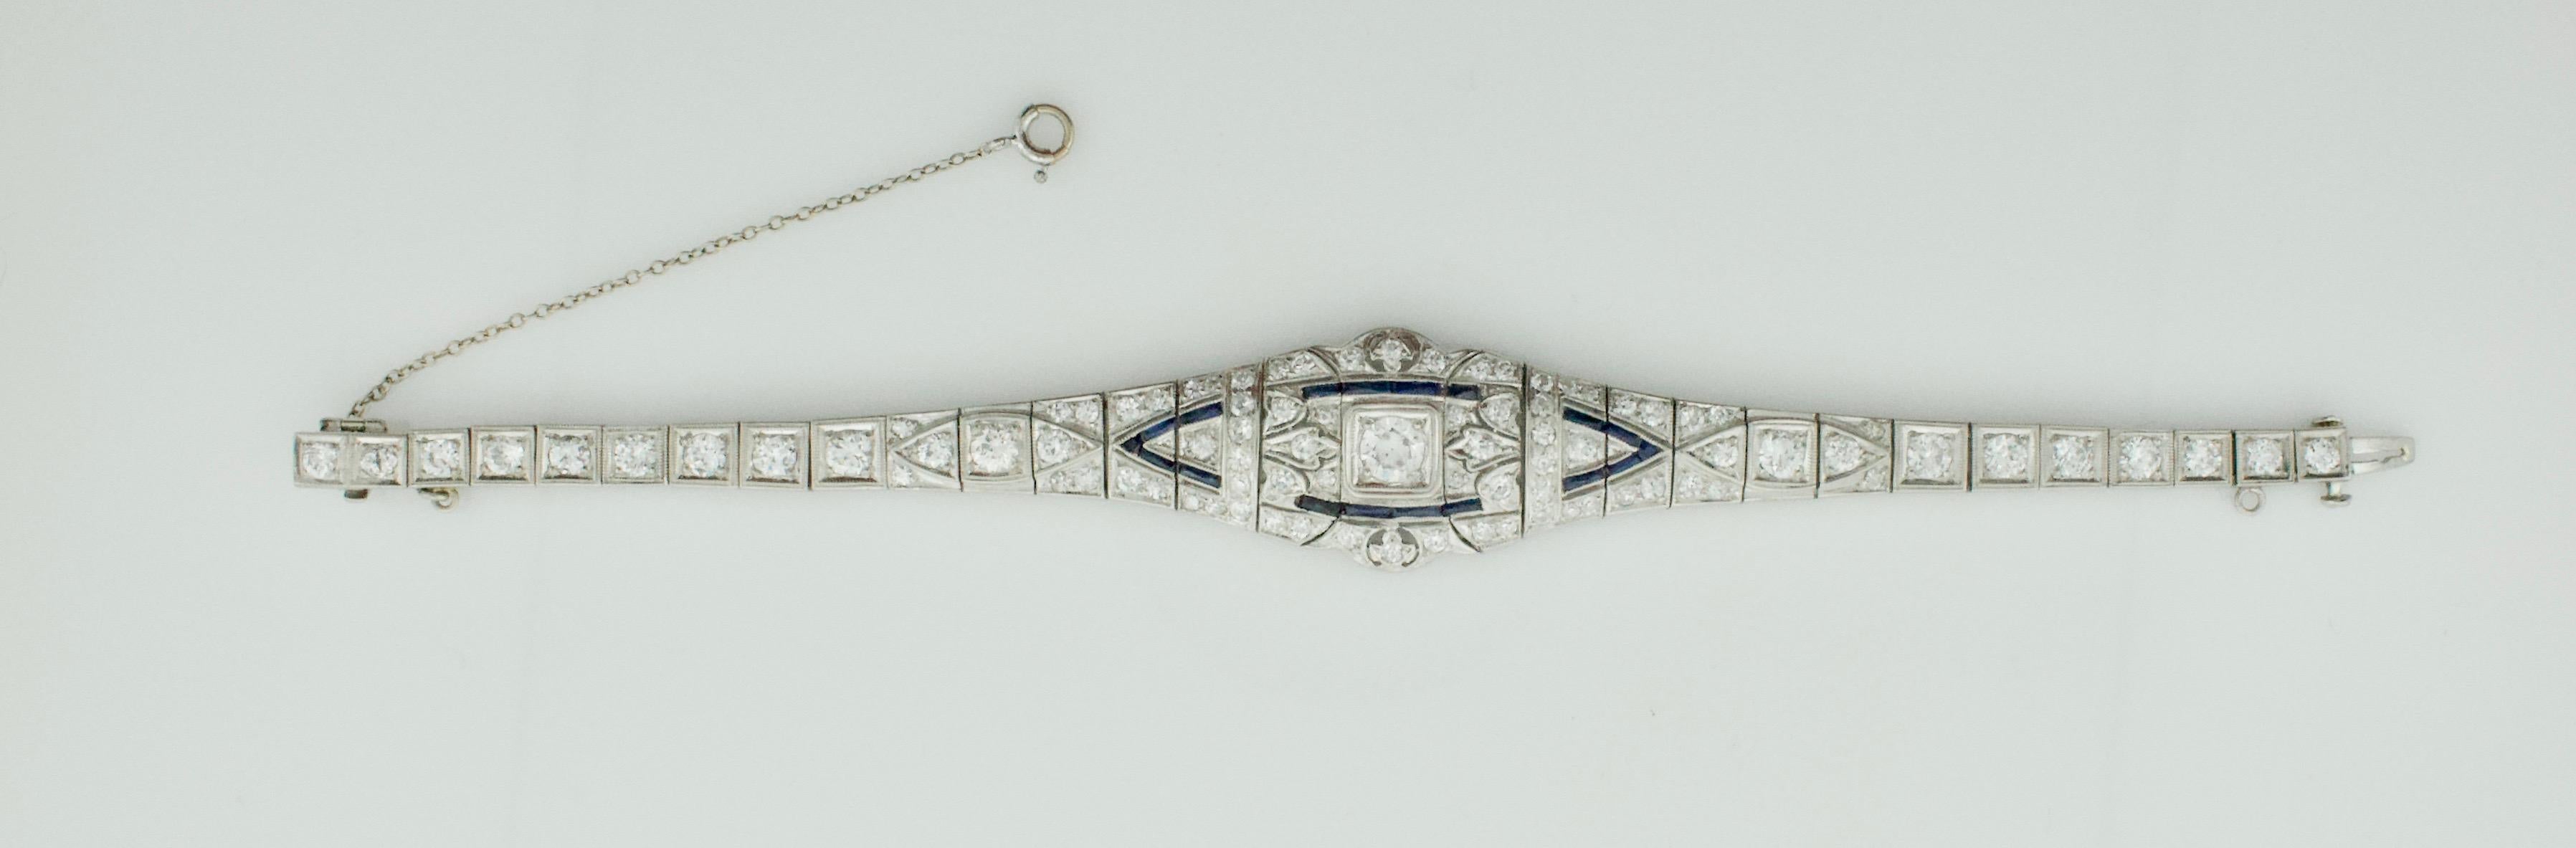 Petite Extreme Art Deco Platinum Diamond and Synthetic Sapphire Bracelet c.1920
Looking for a vintage piece of jewelry that is truly one of a kind? Look no further than this Extreme Art Deco Lady's Platinum Diamond/Synthetic Sapphire Circa 1920's